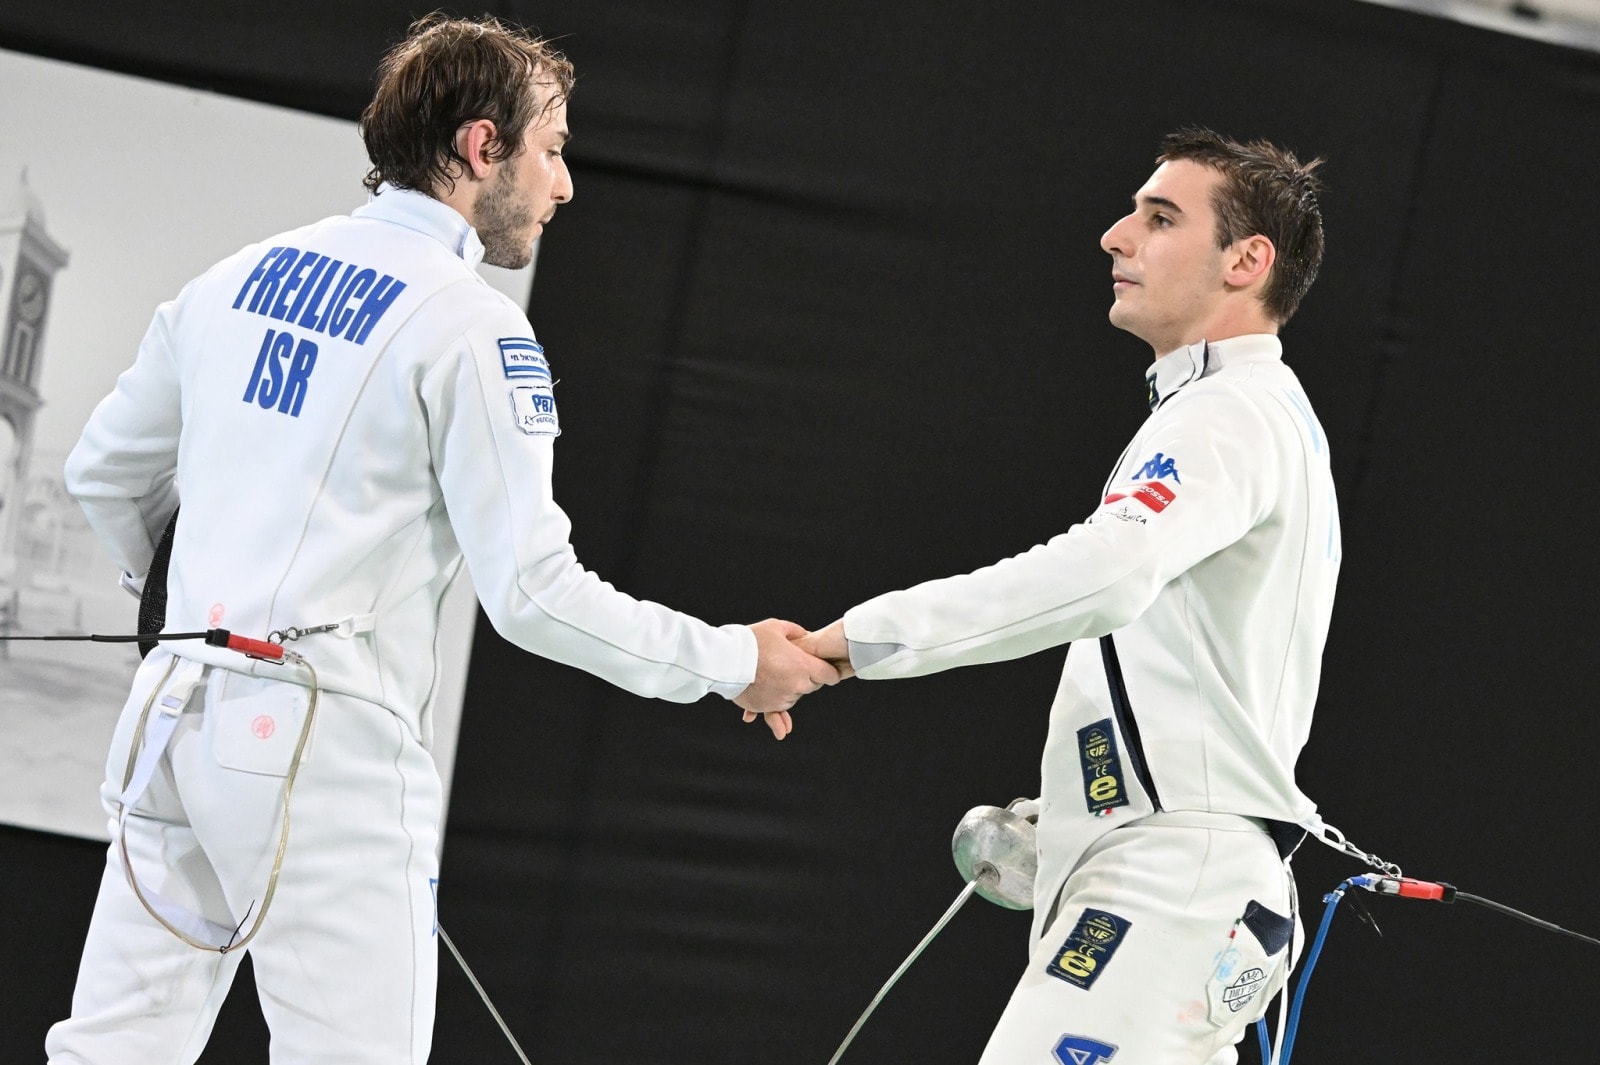 Israeli fencer Yuval Freilich shaking hands with his opponent at the 2024 Doha Grand Prix. Photo by Augusto Bizzi/courtesy of Israel Fencing Association